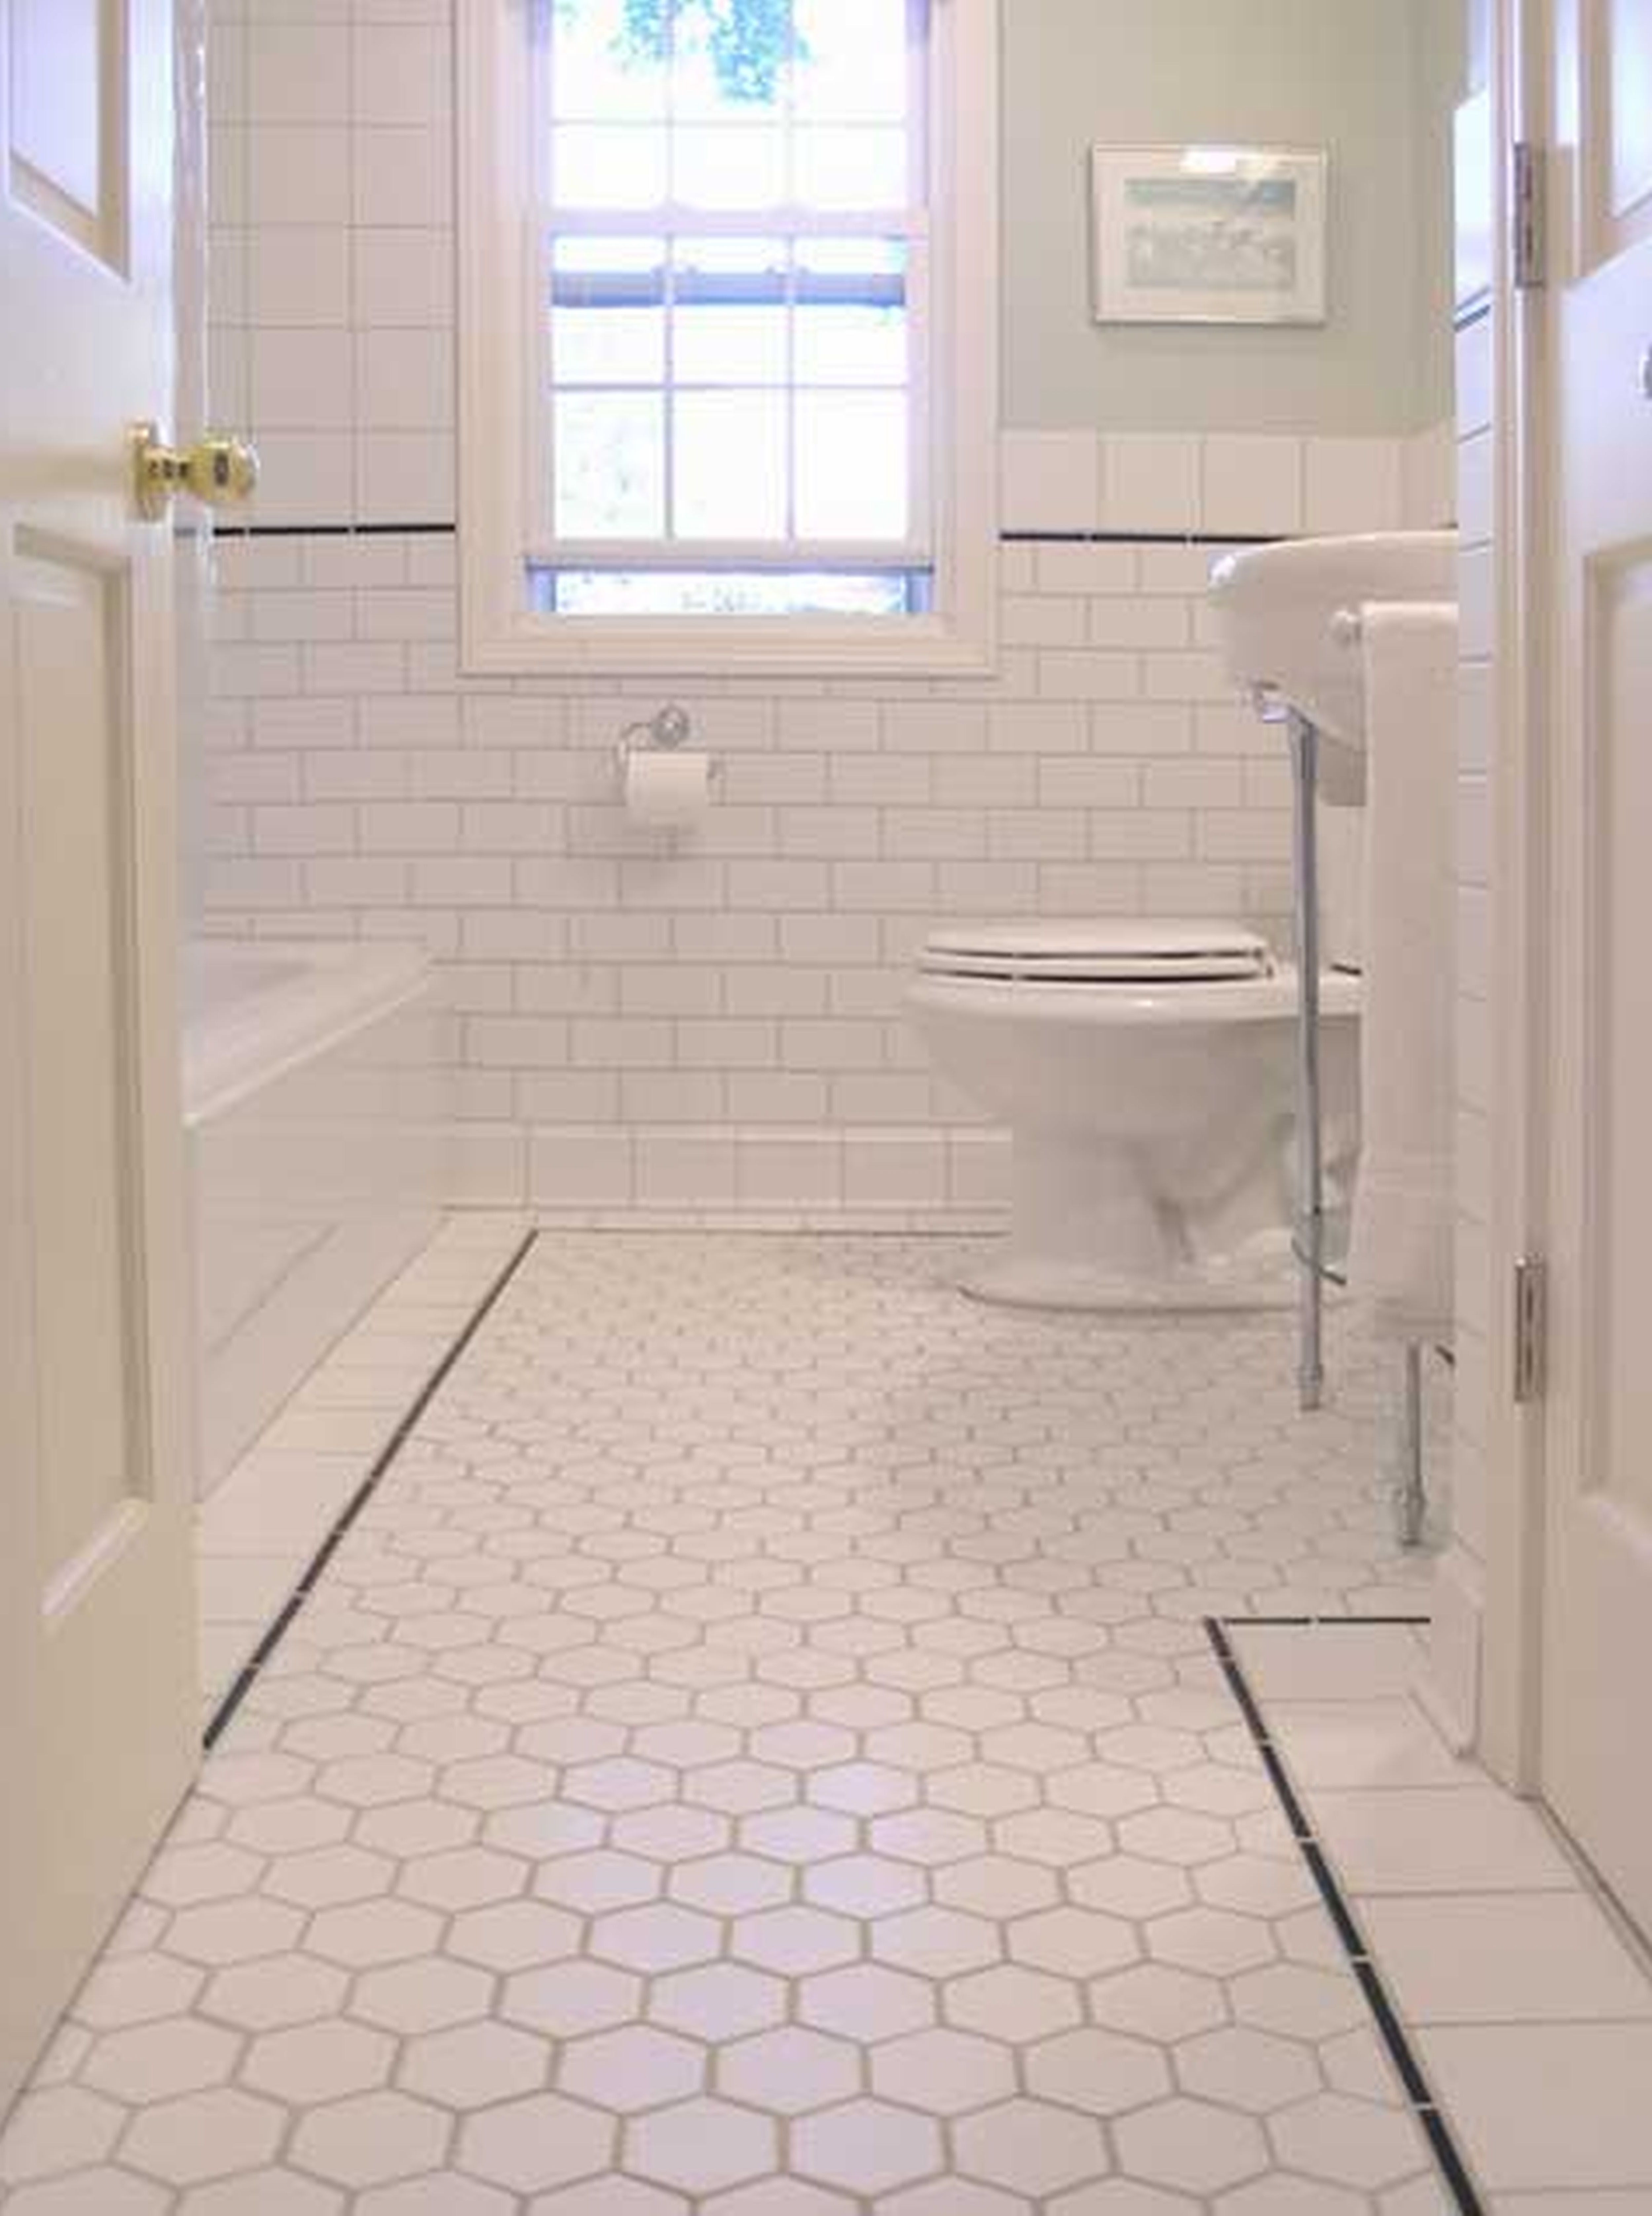 36 nice ideas and pictures of vintage bathroom tile design ...